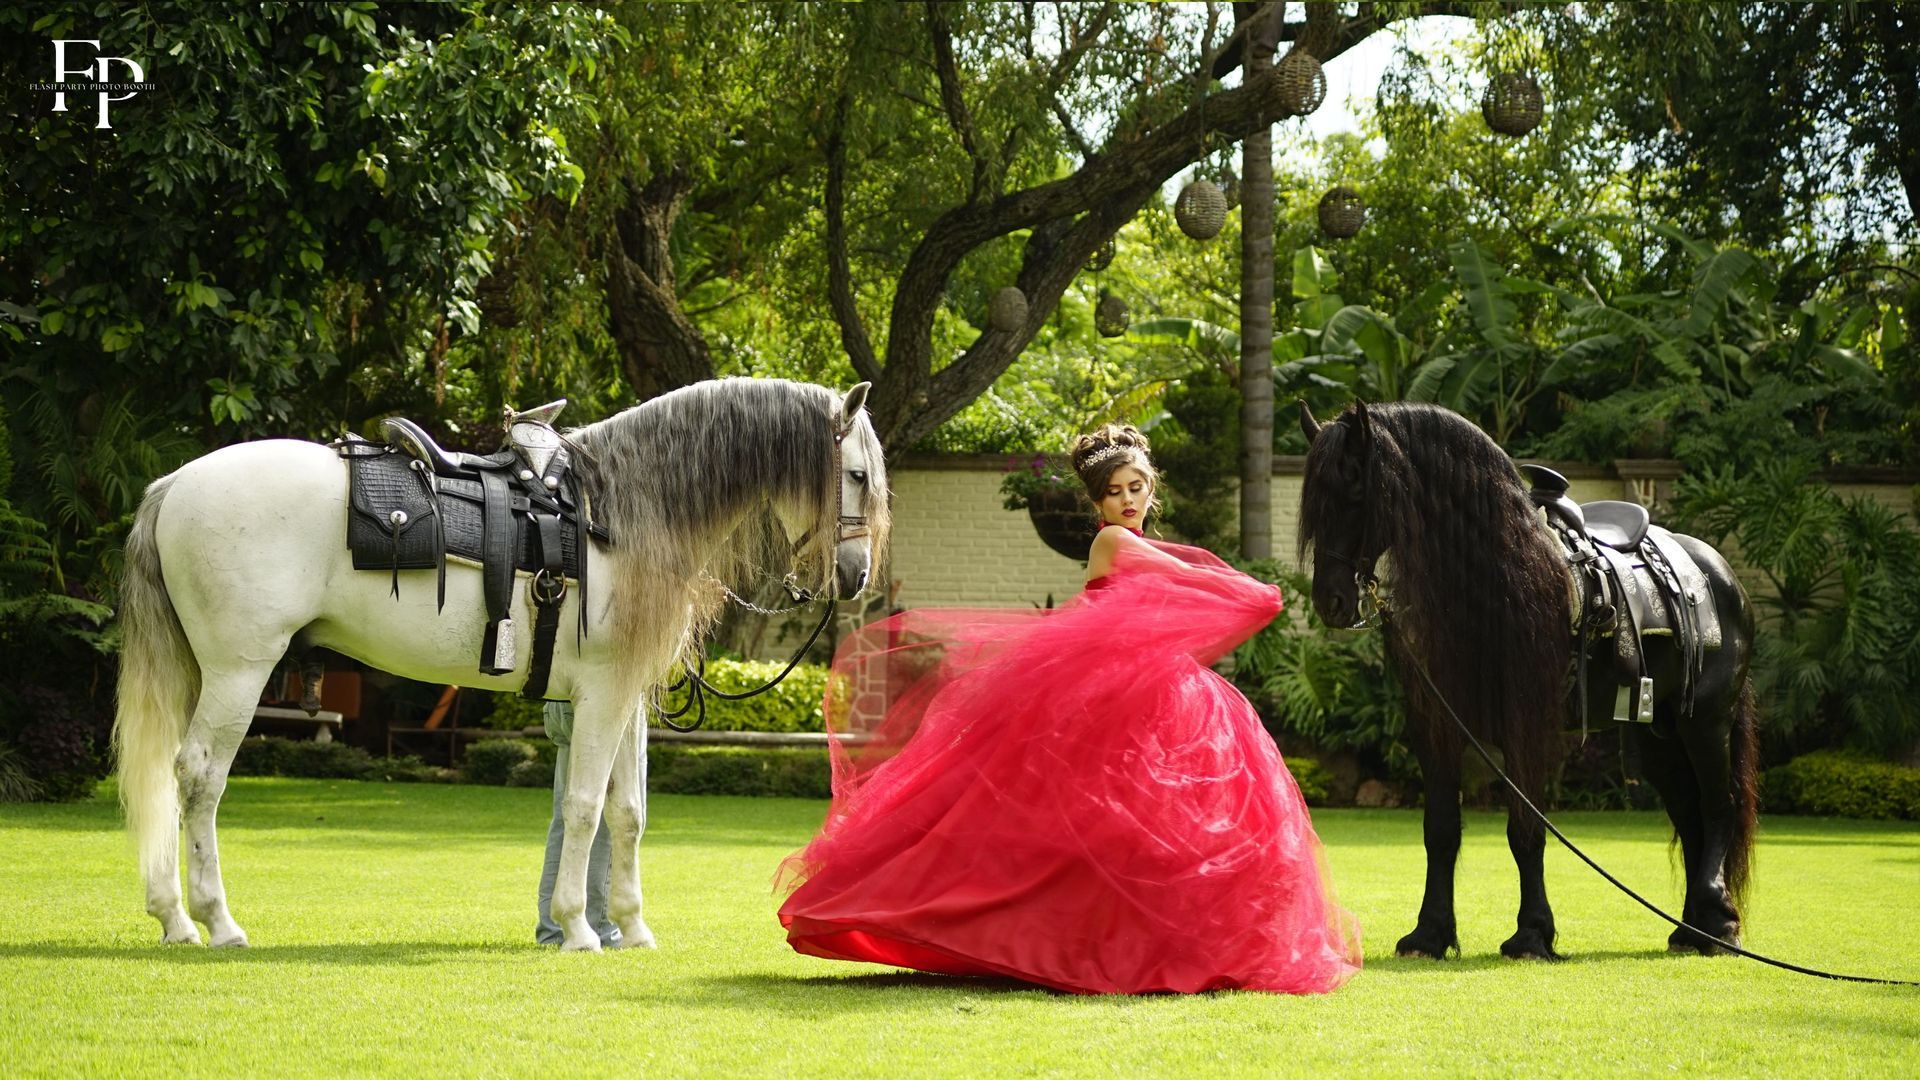 The Quinceañera enjoys a dance with two majestic horses gracing the scene behind her.